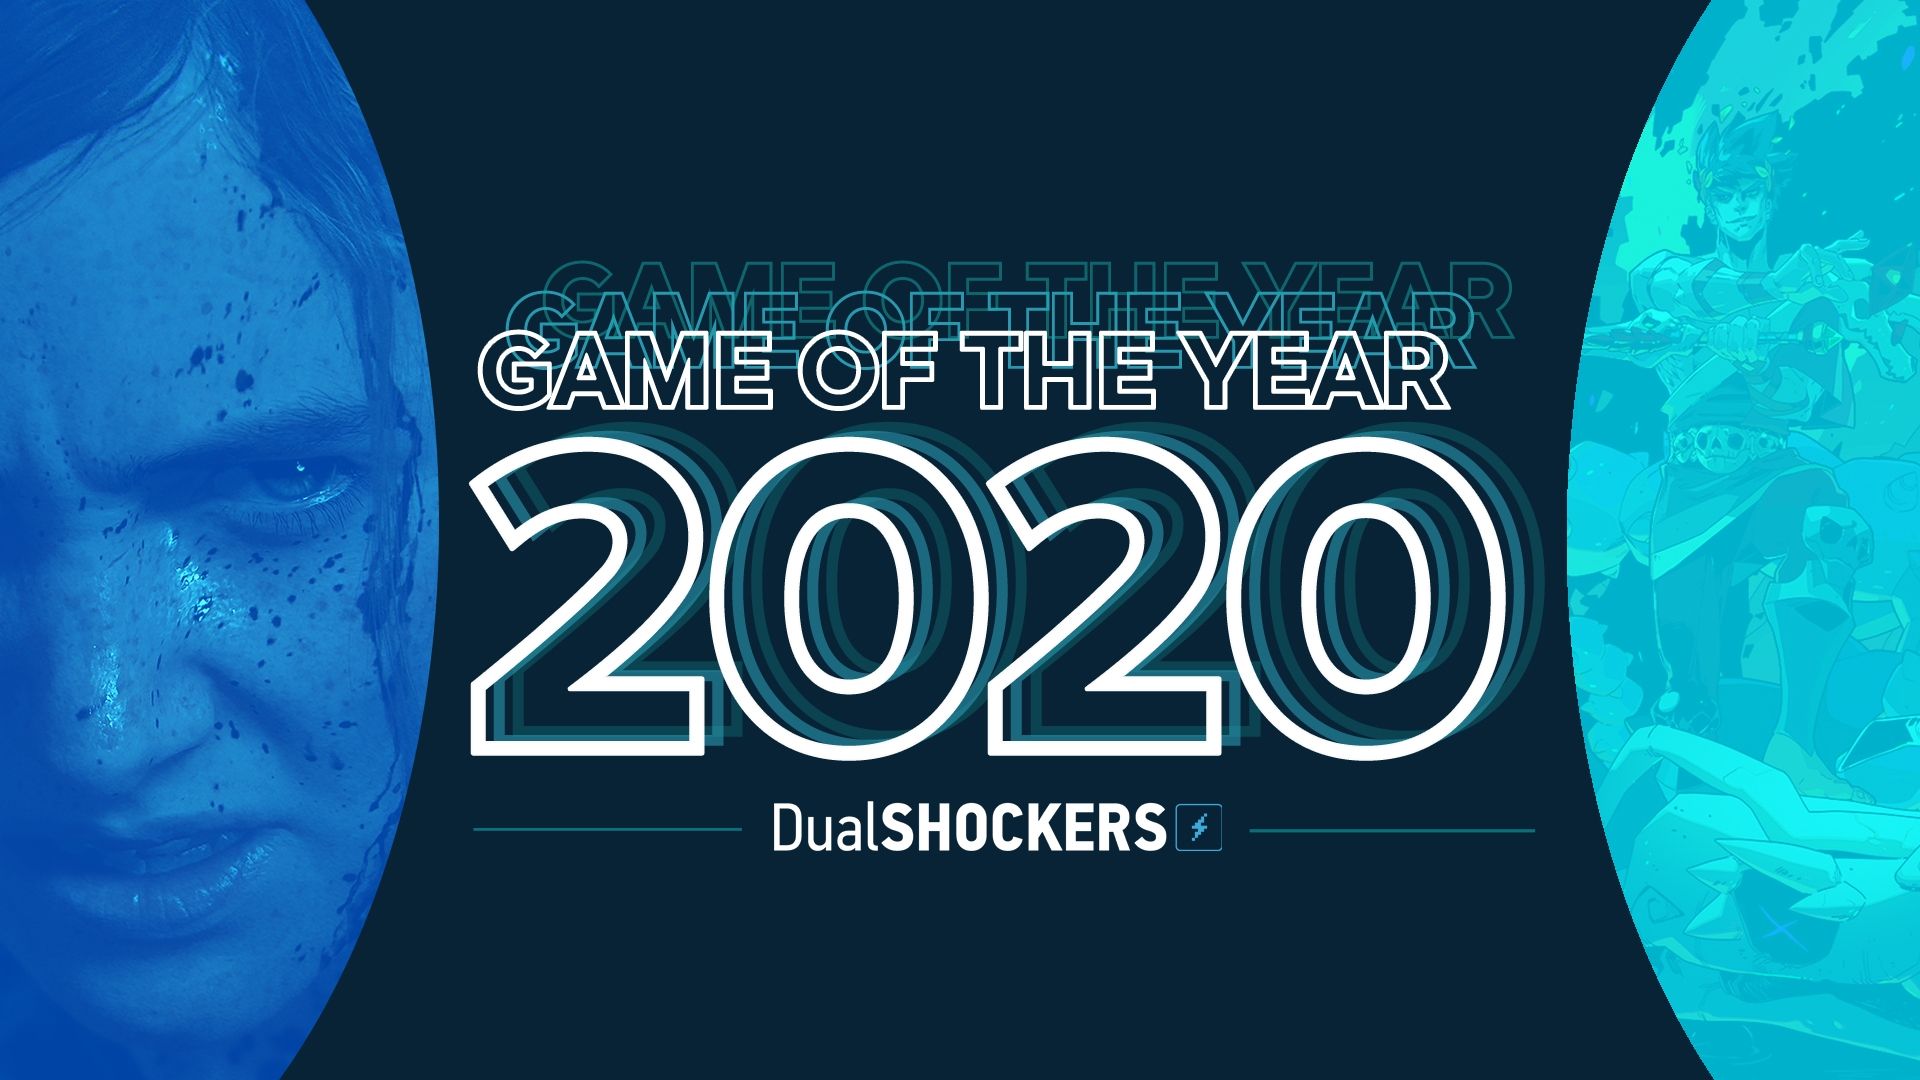 DualShockers' Game of the Year 2020 Nominations & Readers' Choice